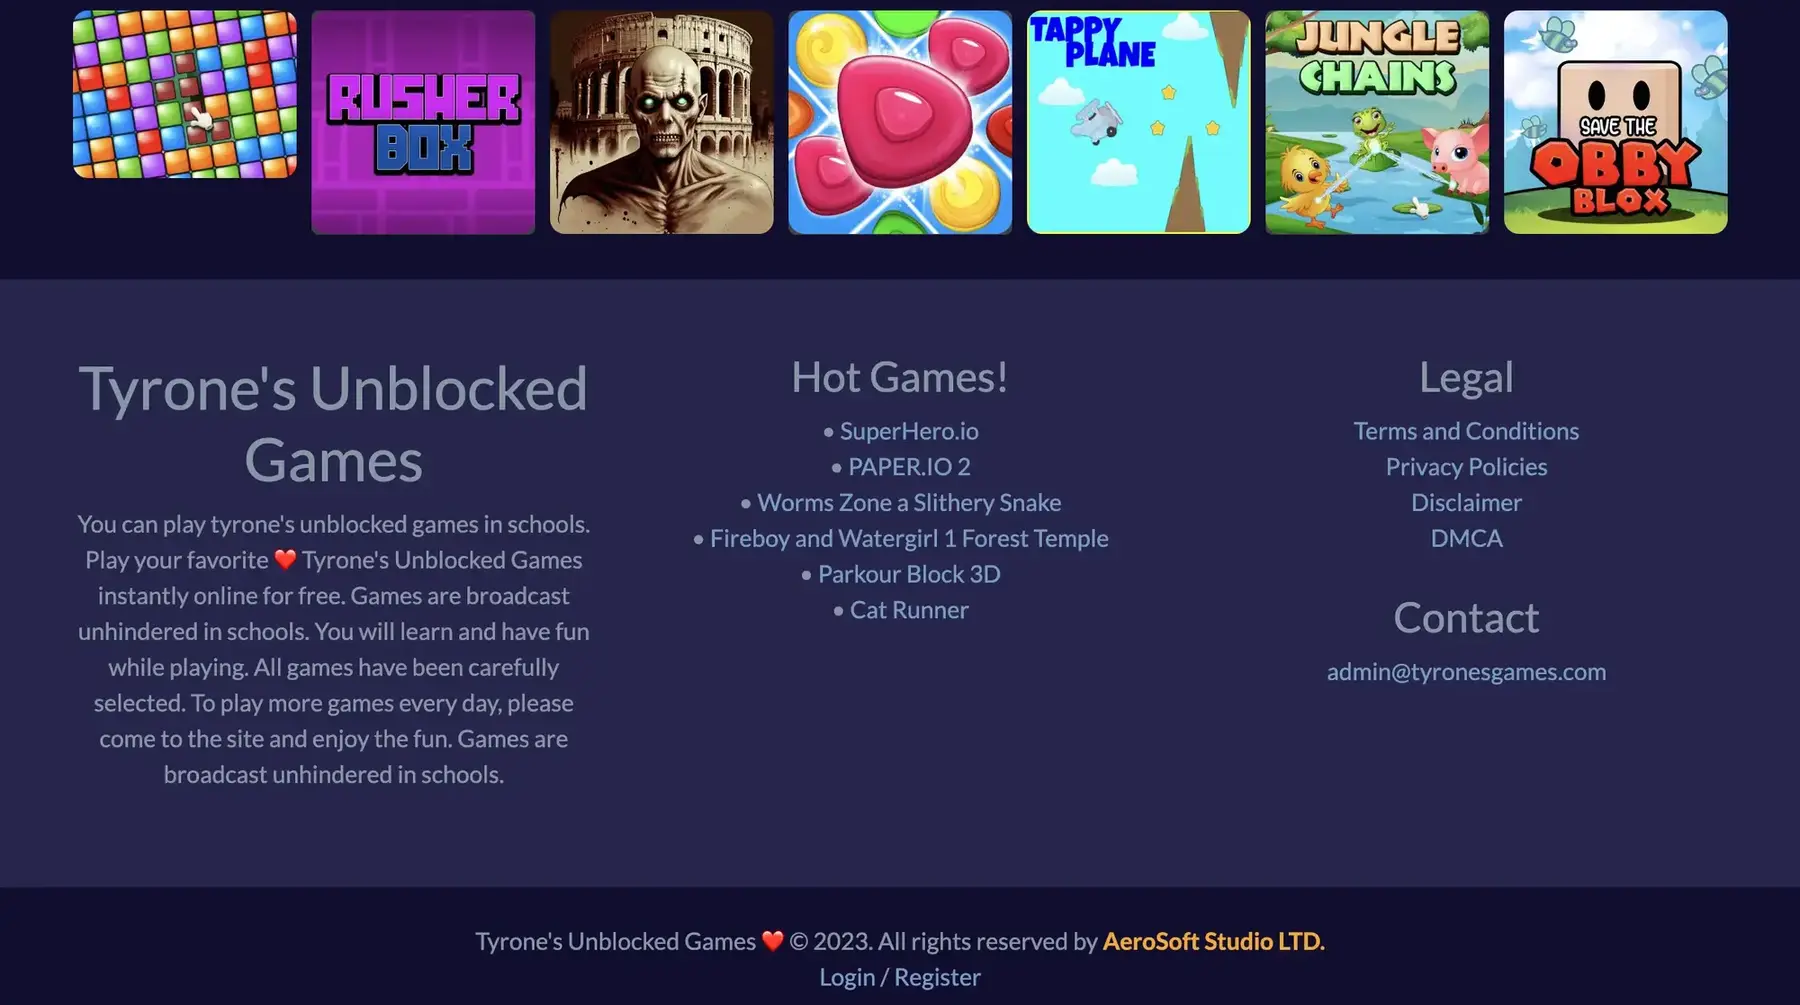 what is tyrone's unblocked games